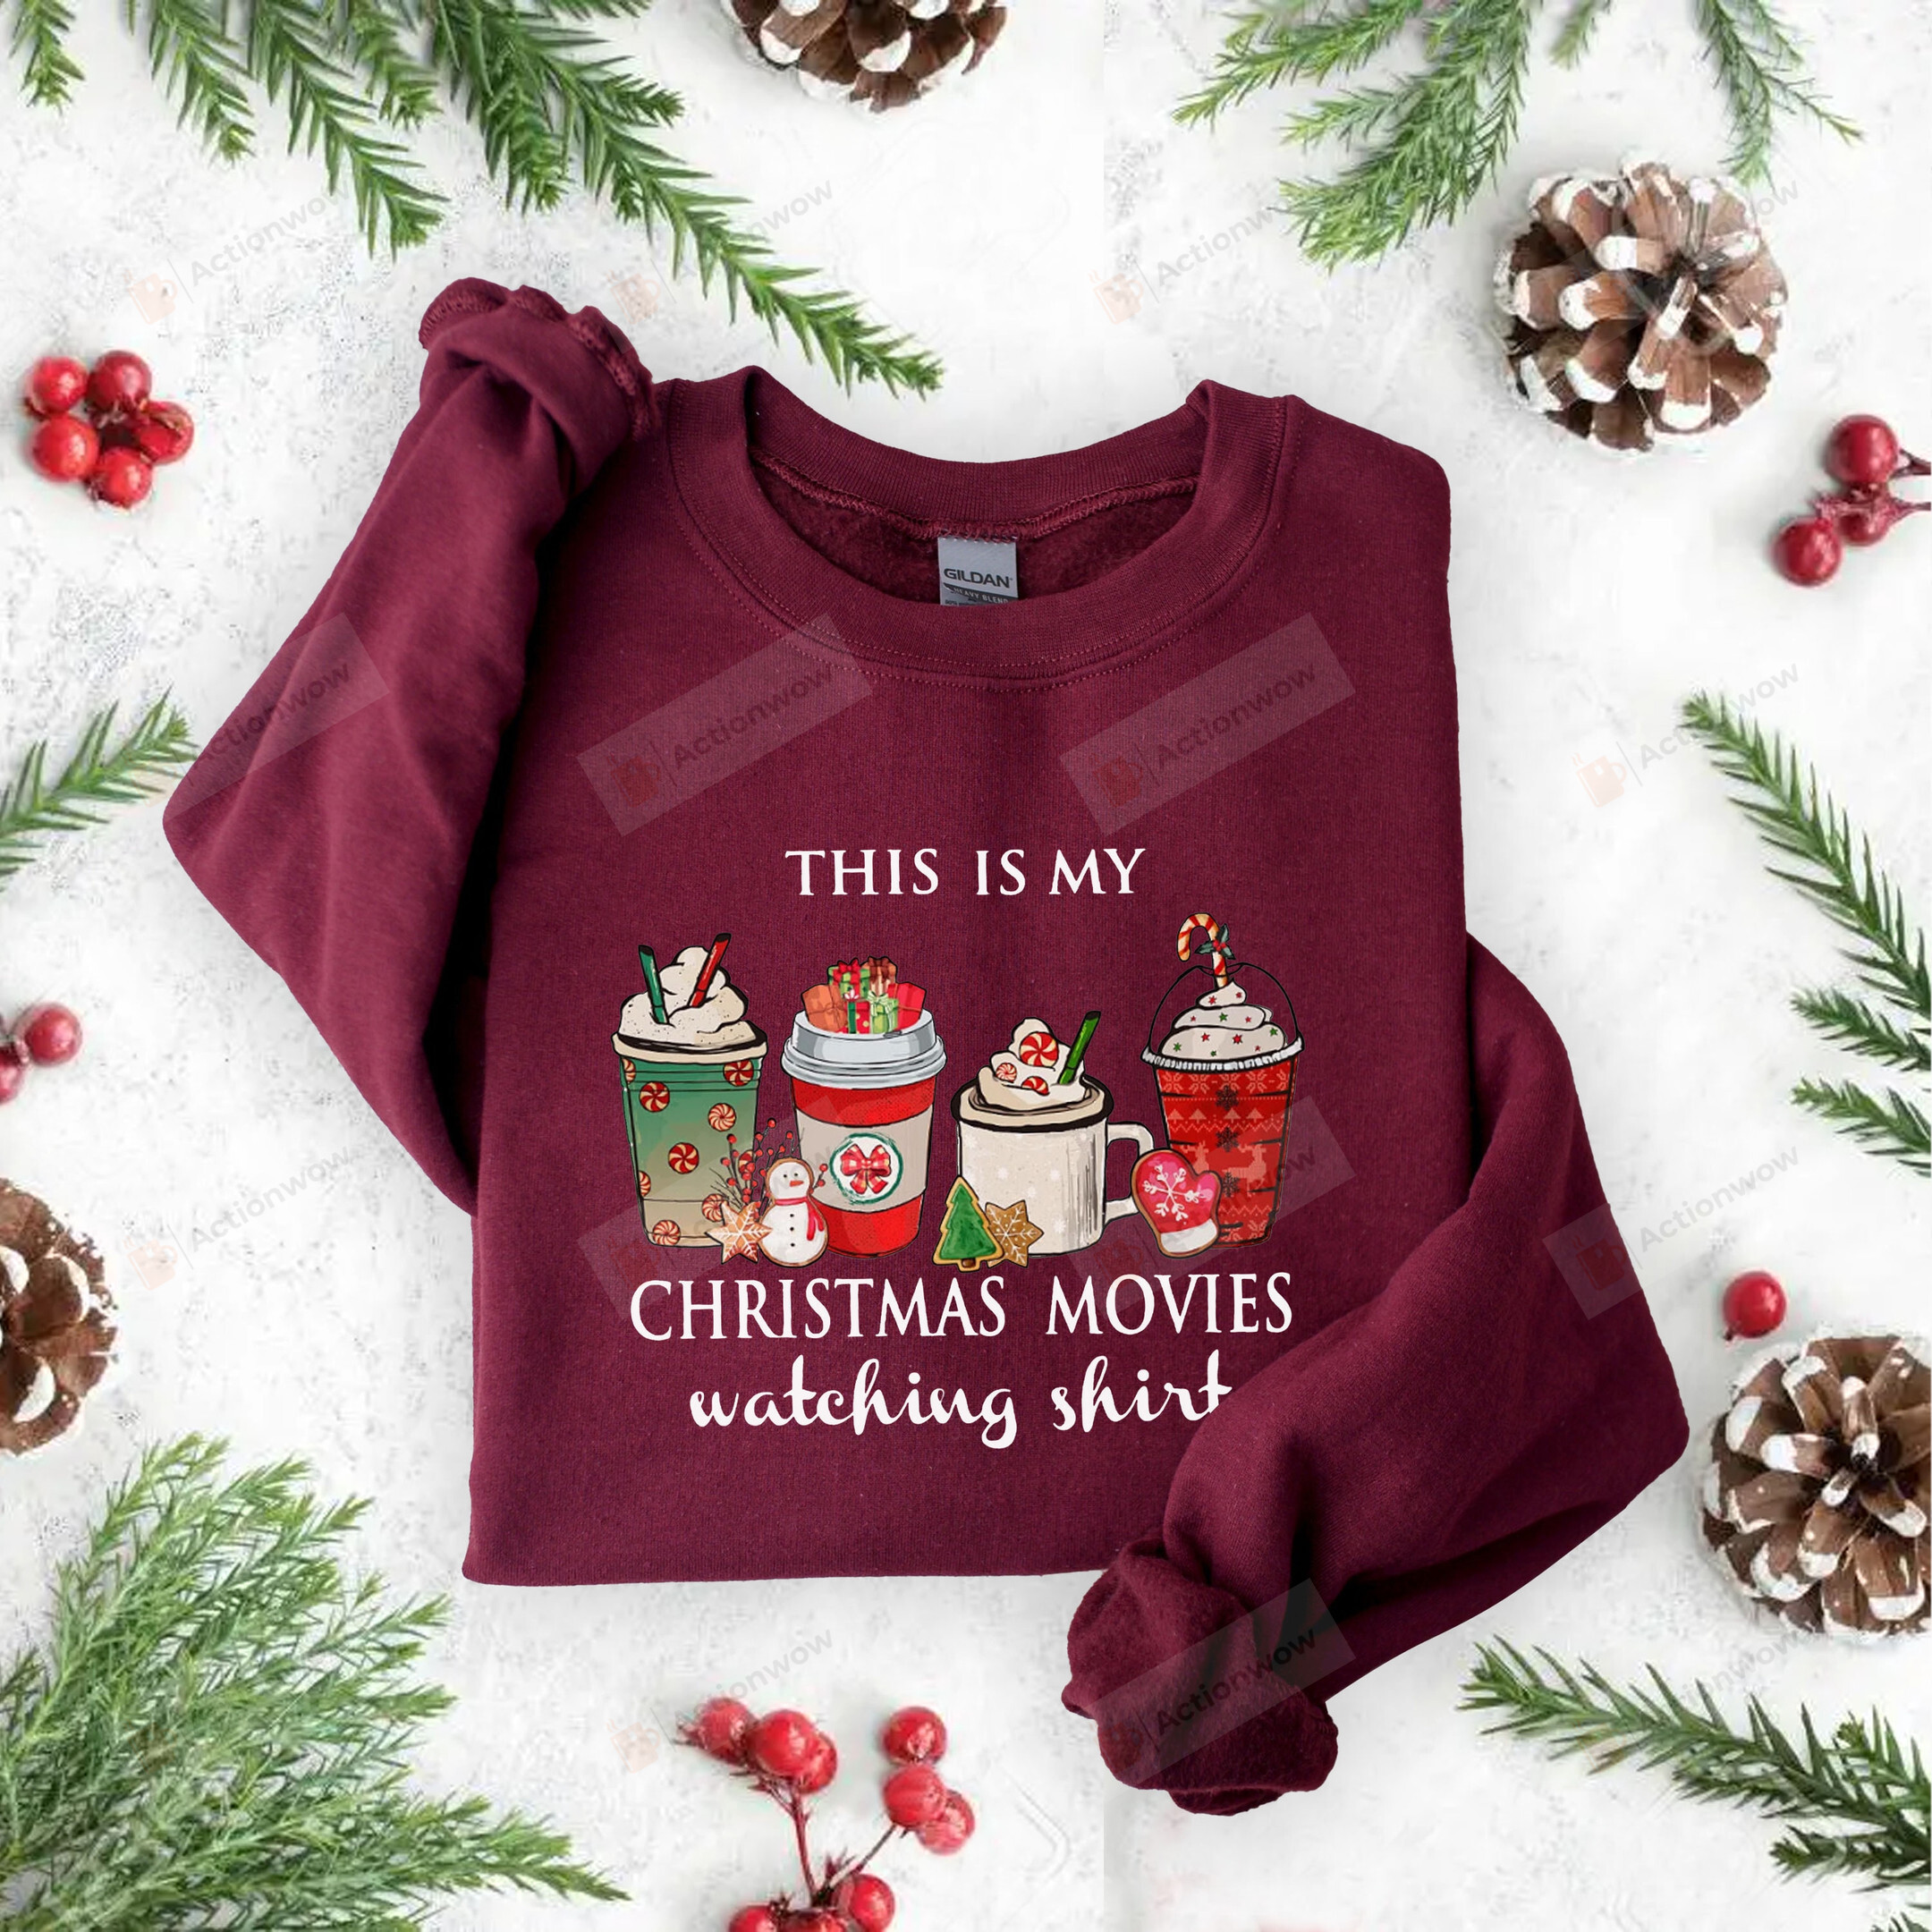 This Is My Christmas Movies Watching Sweatshirts, Christmas Coffee Sweater, Christmas Movies Shirt